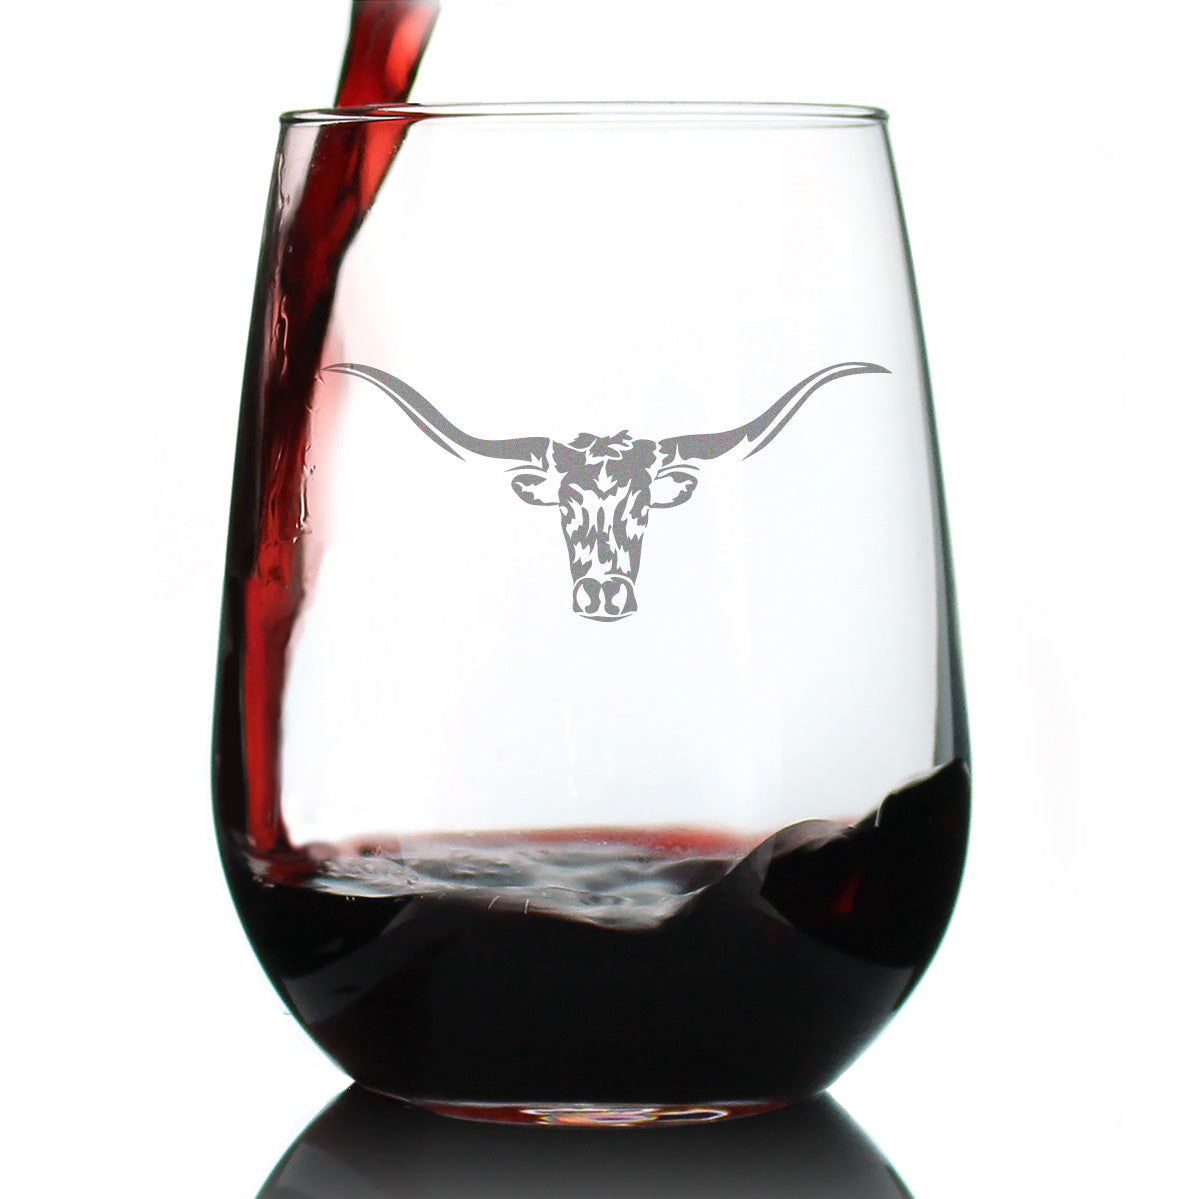 Longhorn Stemless Wine Glass - Western Themed Farm Decor and Gifts for Texan Ranchers - Large 17 Oz Glasses